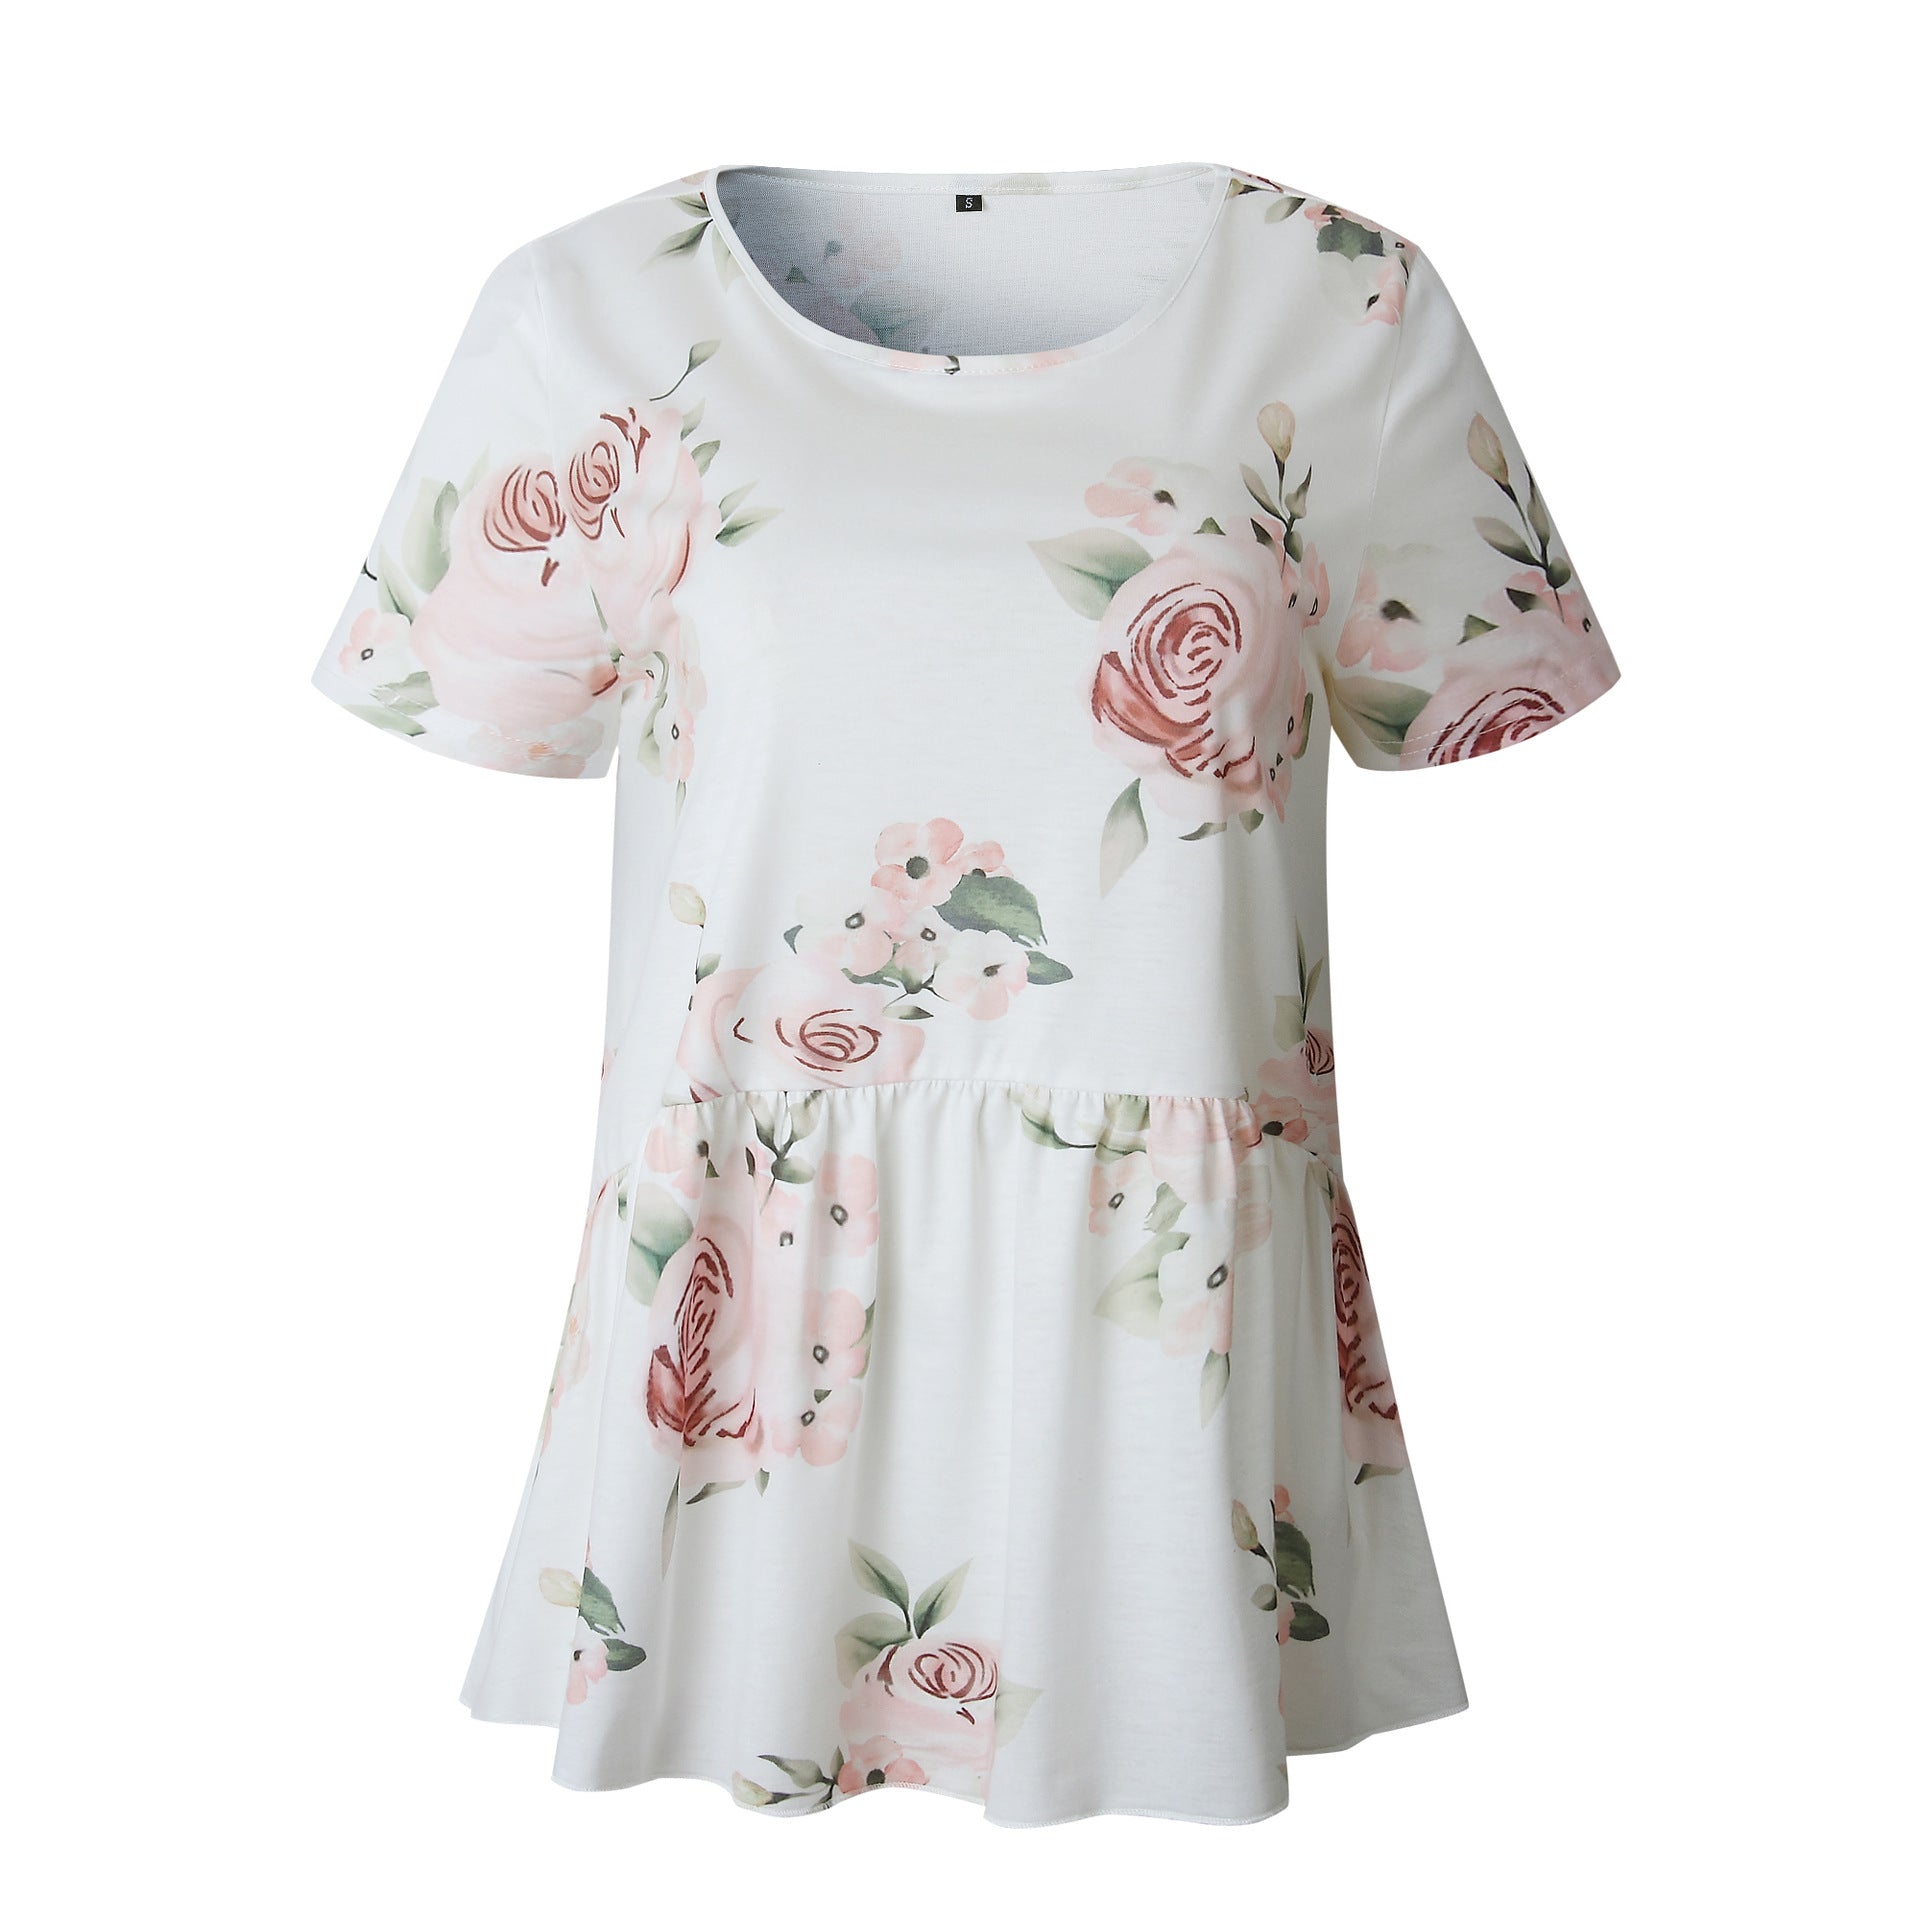 White Floral Short Sleeve Tee